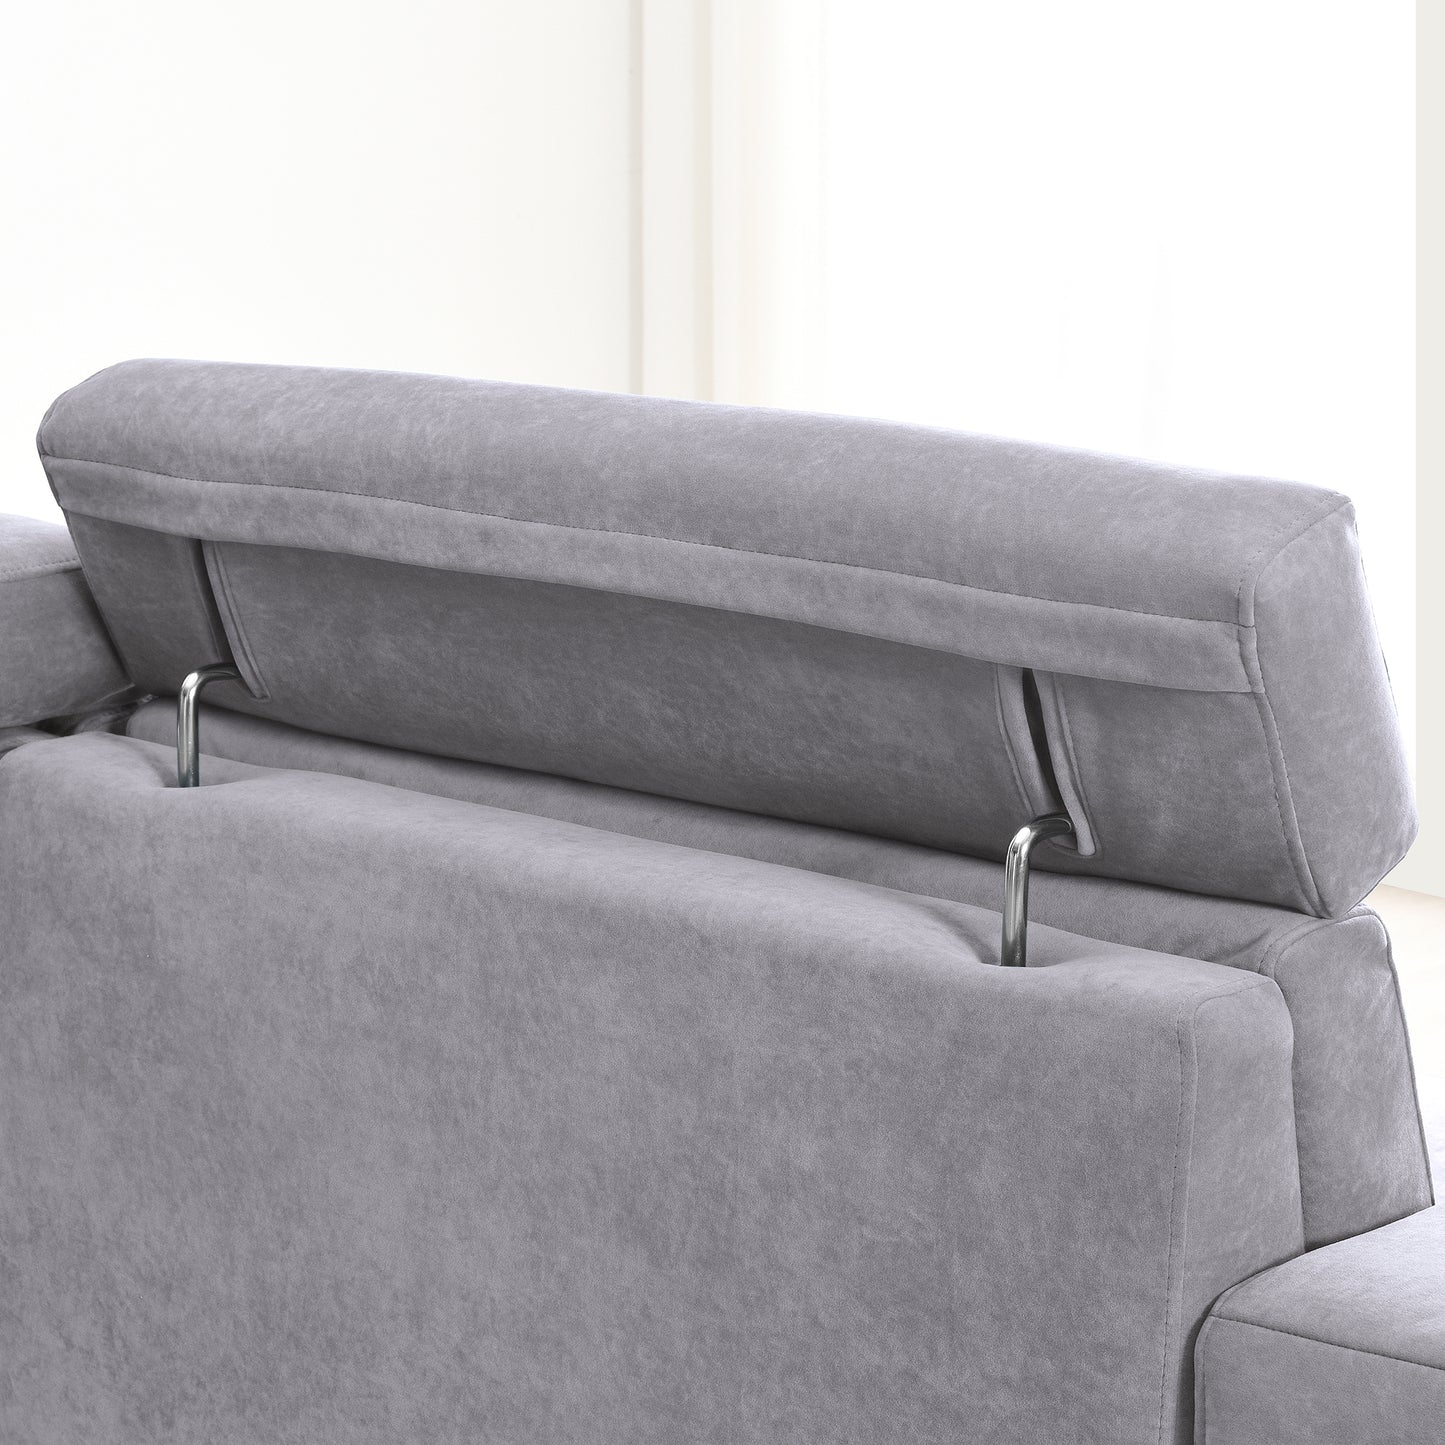 Doral Gray Sectional Sofa Couch w/ Multi-Angle Adjustable Headrest